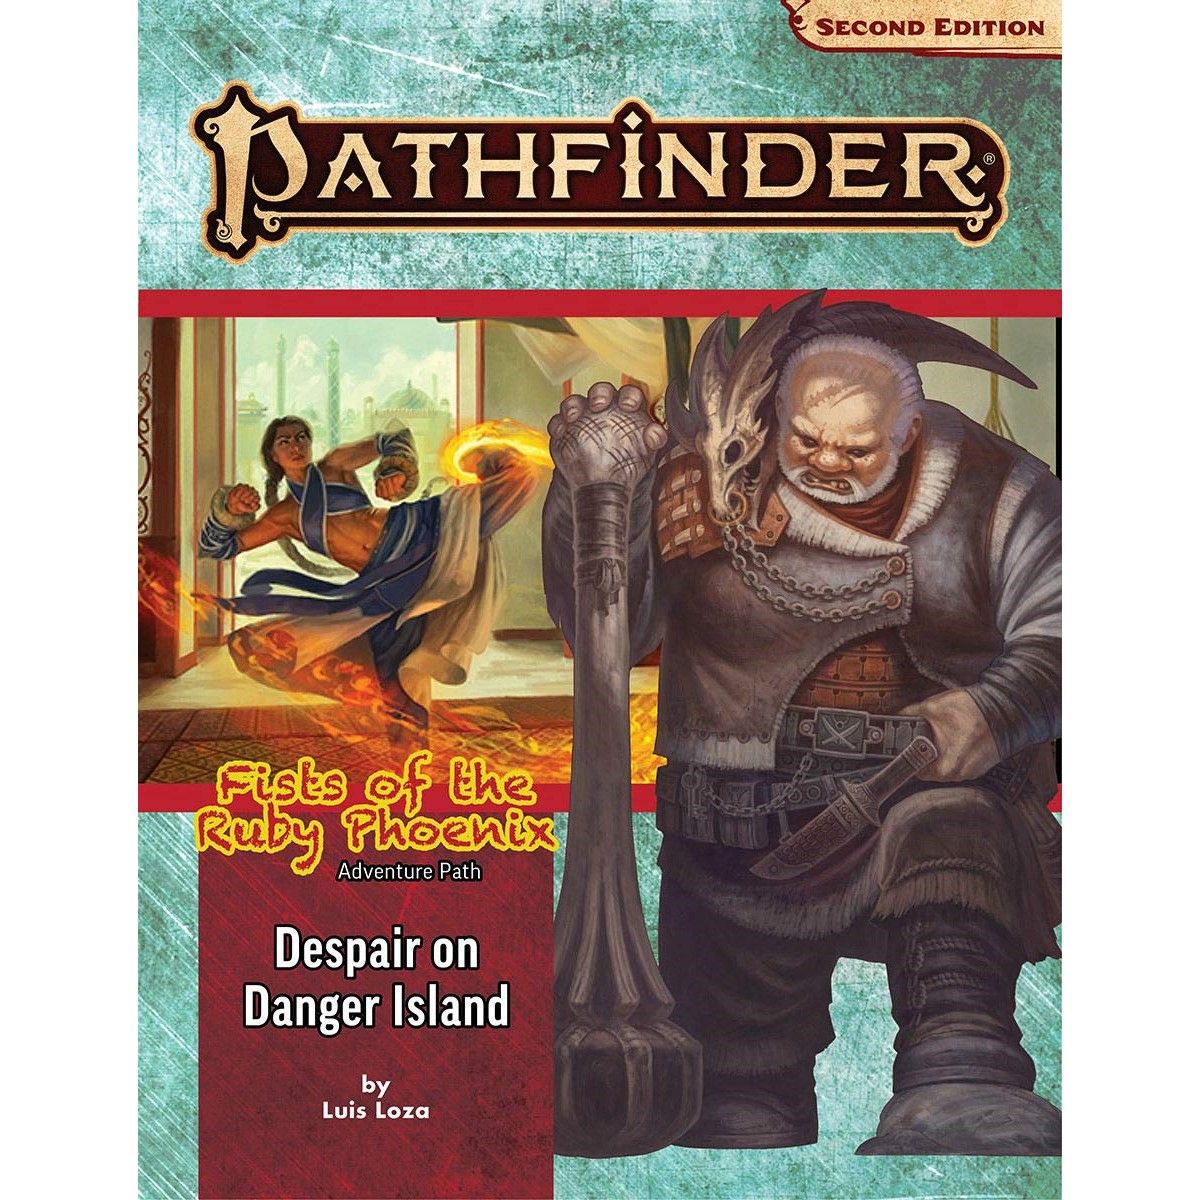 Pathfinder Second Edition Adventure Path Fists of the Ruby Pheonix #1 Despair on Danger Island